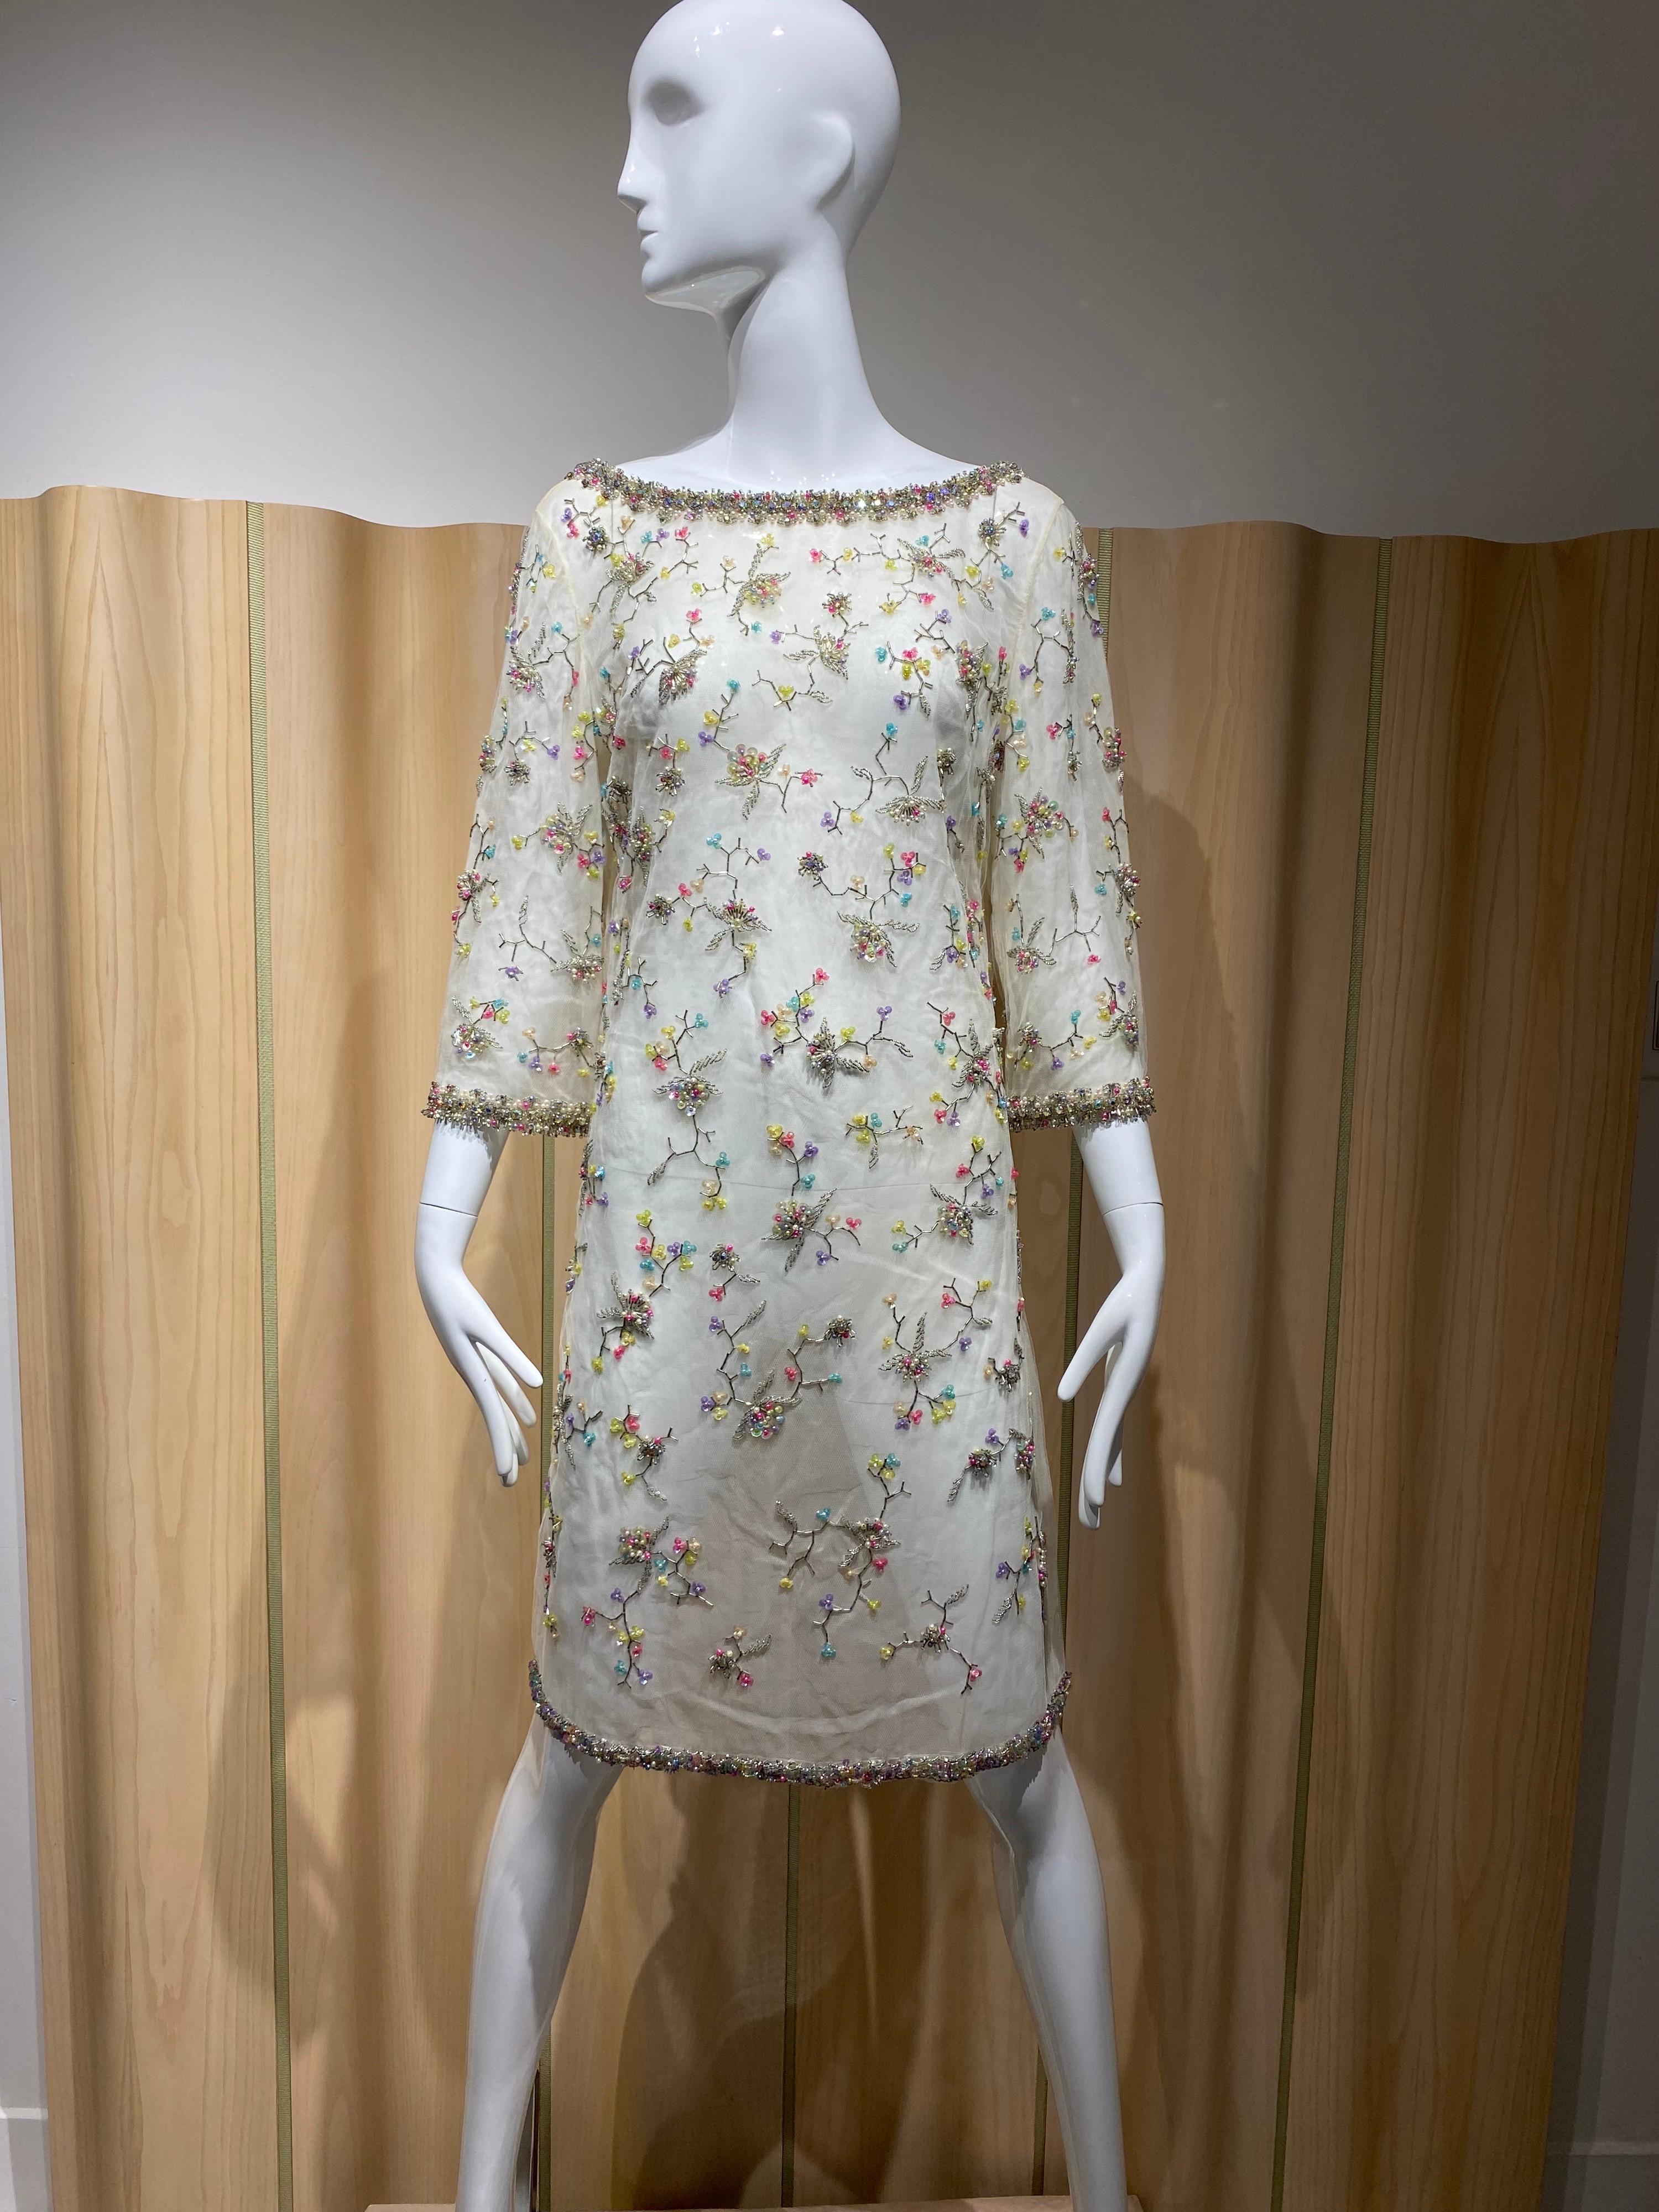 1960s Sheer white netting sheath cocktail dress embellished with multi color beads in floral pattern. Size Medium- Large 

Measurement:
Bust : 38” / W: 36”/ Hip: 40”/ length 36”